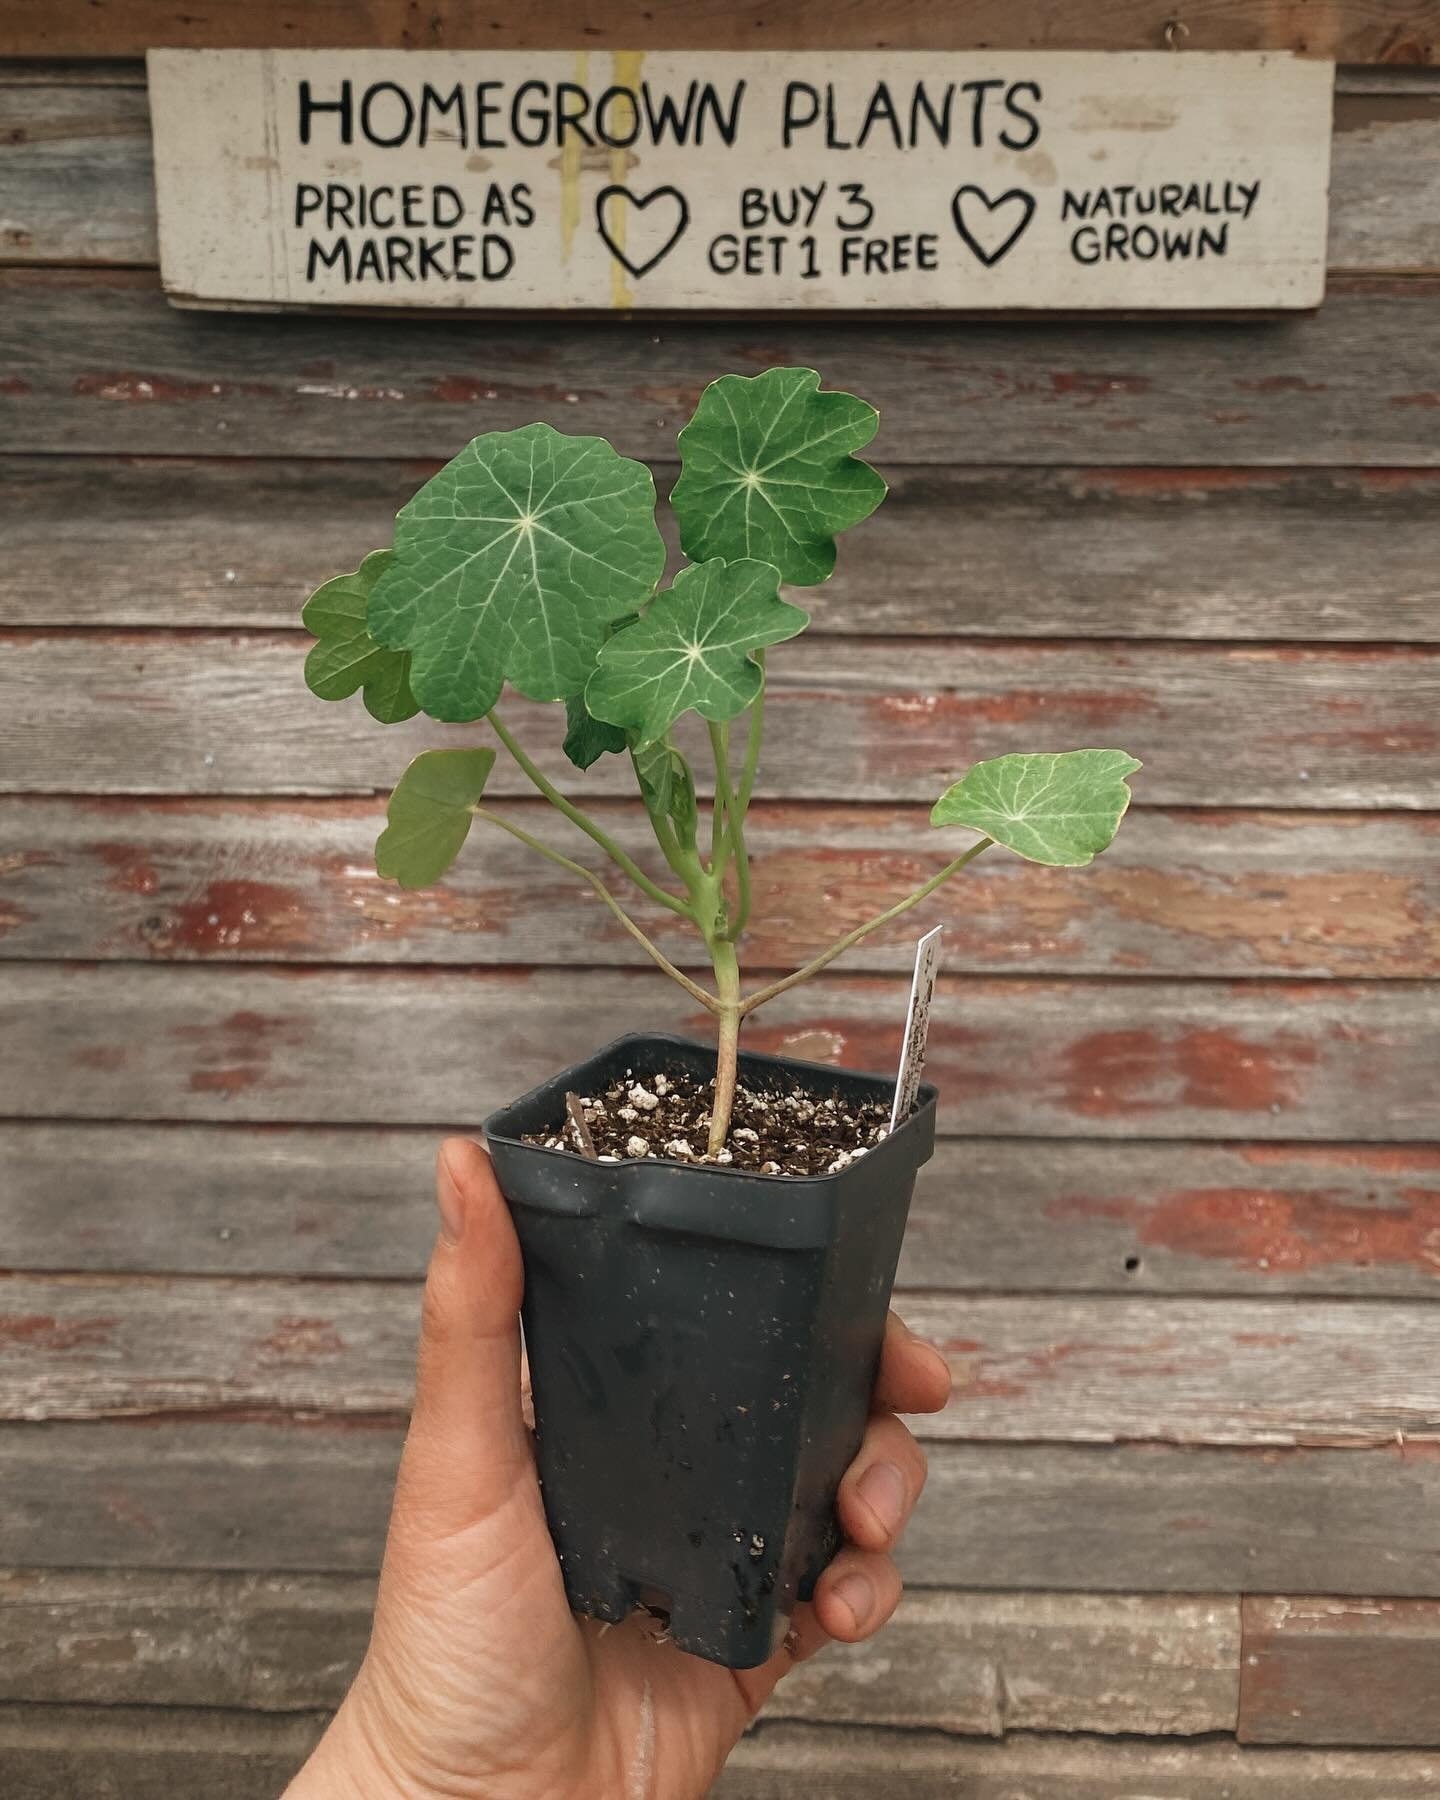 🌱 Homegrown plants, from our homestead to yours! 🌱

We&rsquo;ve been tending these seedlings since mid-February and are excited for them to find a new home in your gardens! Starting this weekend, we have warm weather crops including heirloom tomato